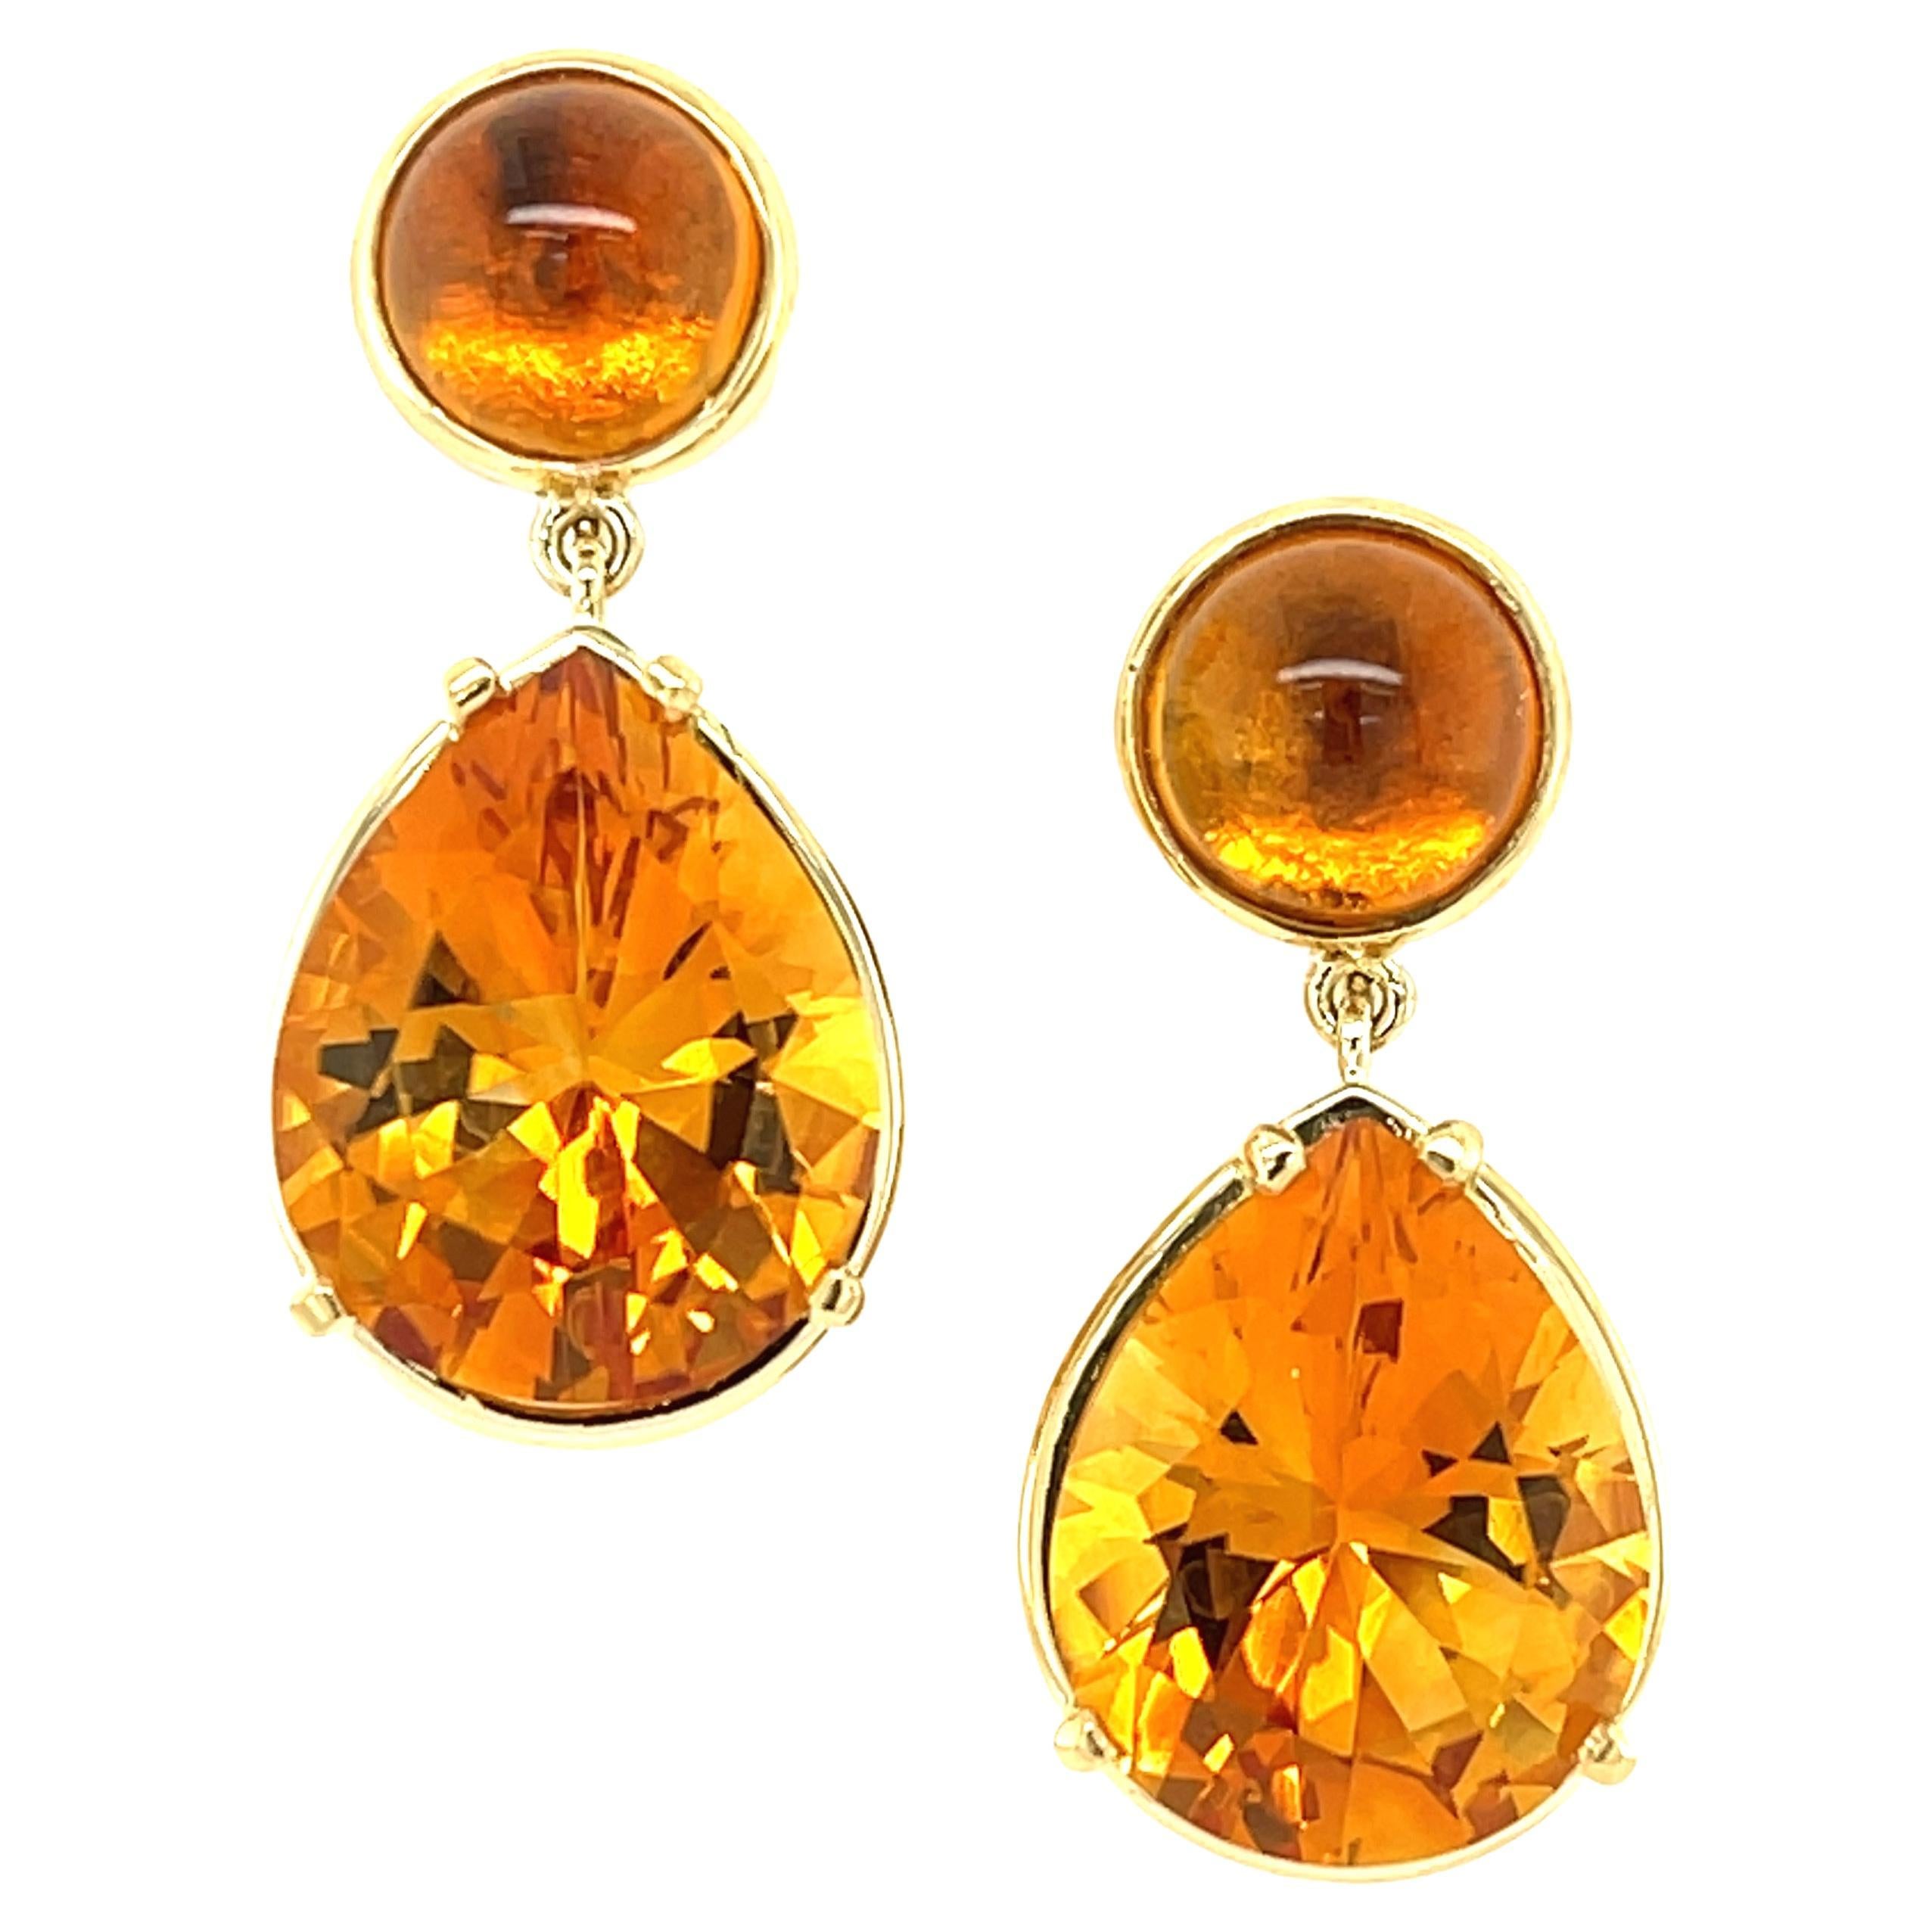  Citrine Drop Earrings, Cabochons and Faceted Pears in Yellow Gold, 26.18 Carats